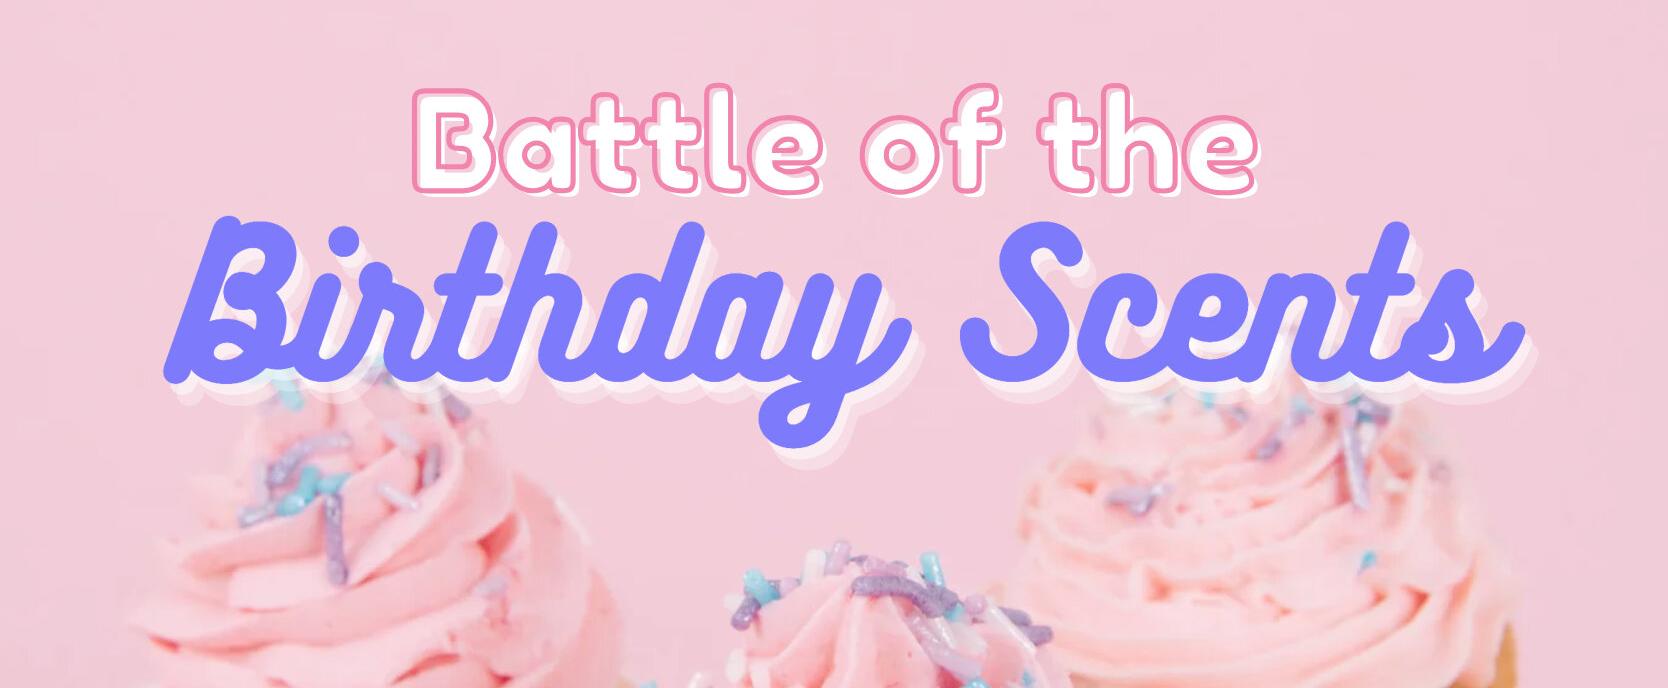 Battle of the Birthday Scents